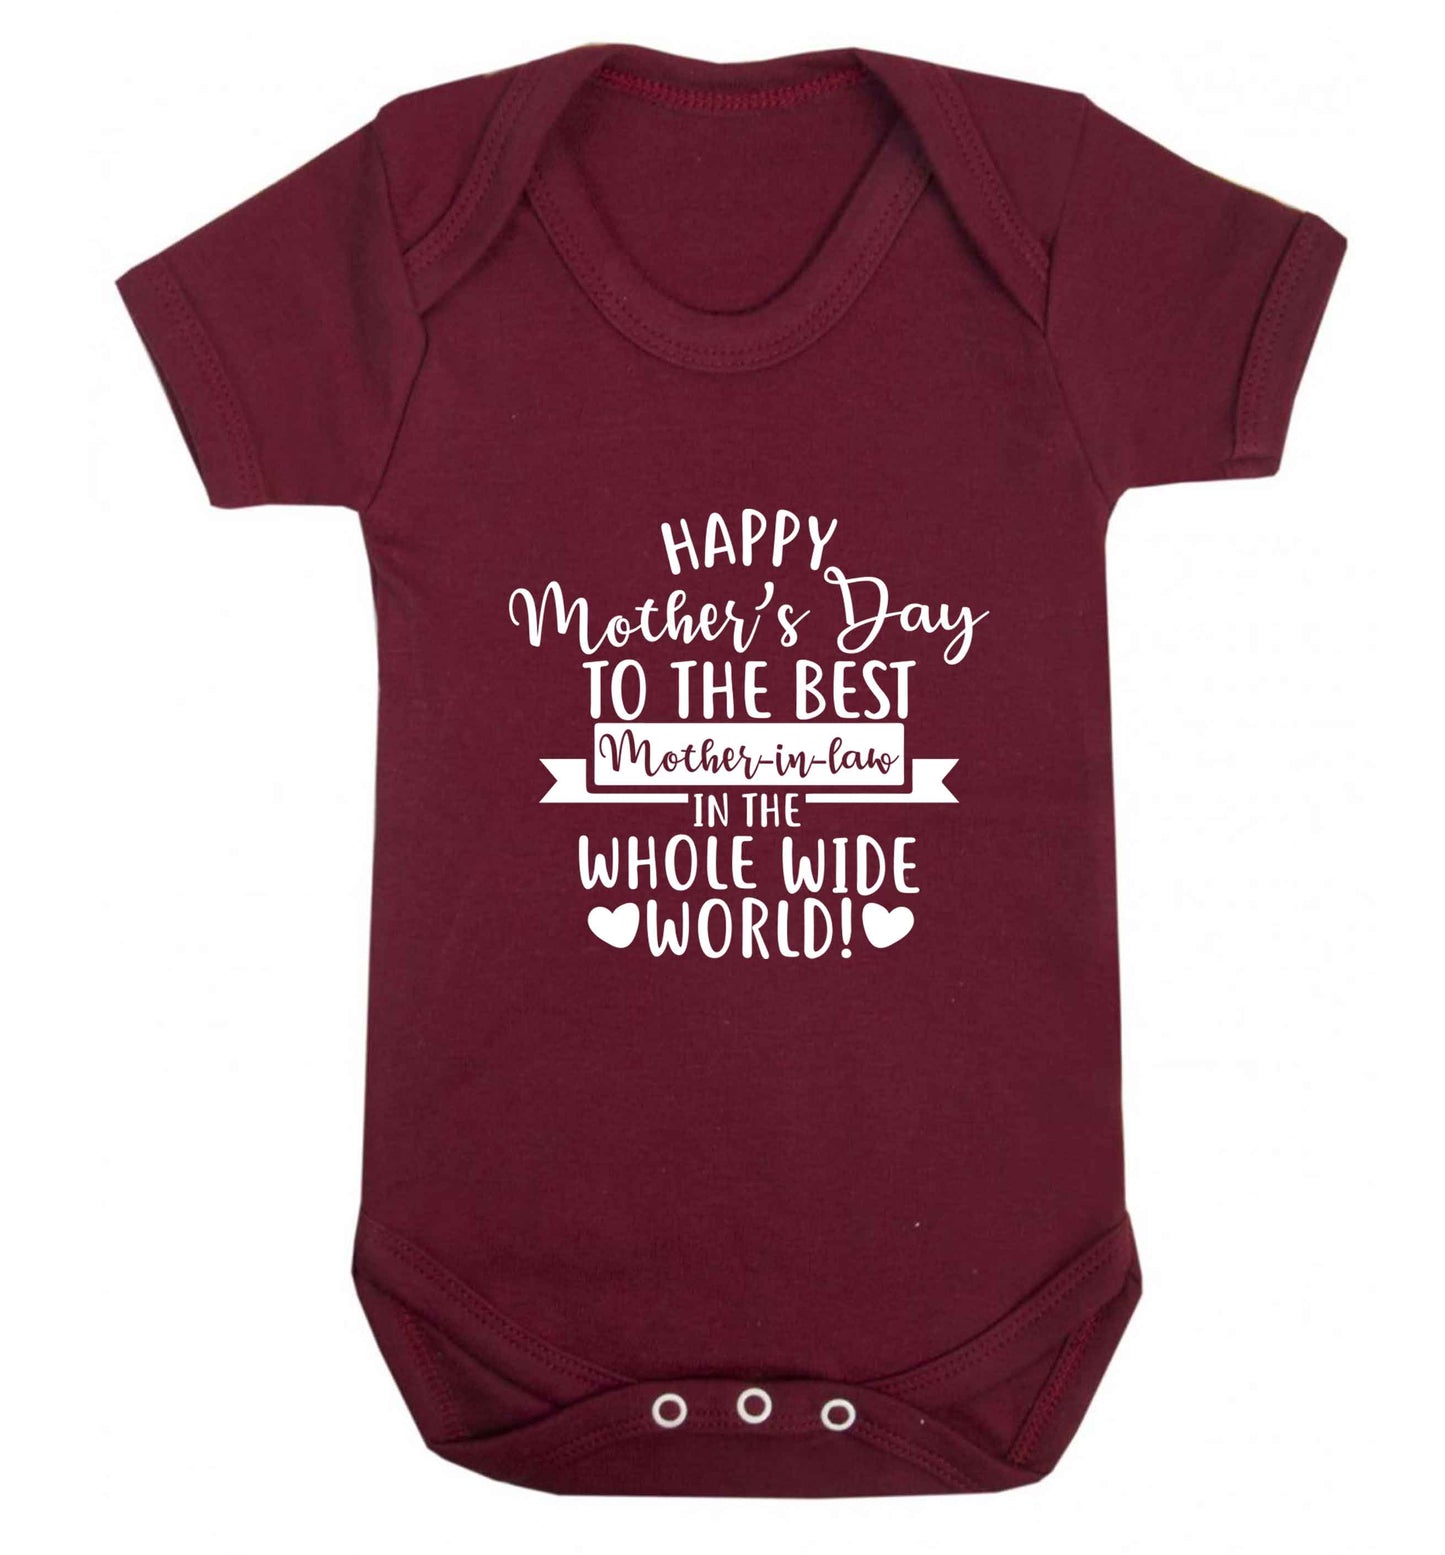 Happy mother's day to the best mother-in law in the world baby vest maroon 18-24 months